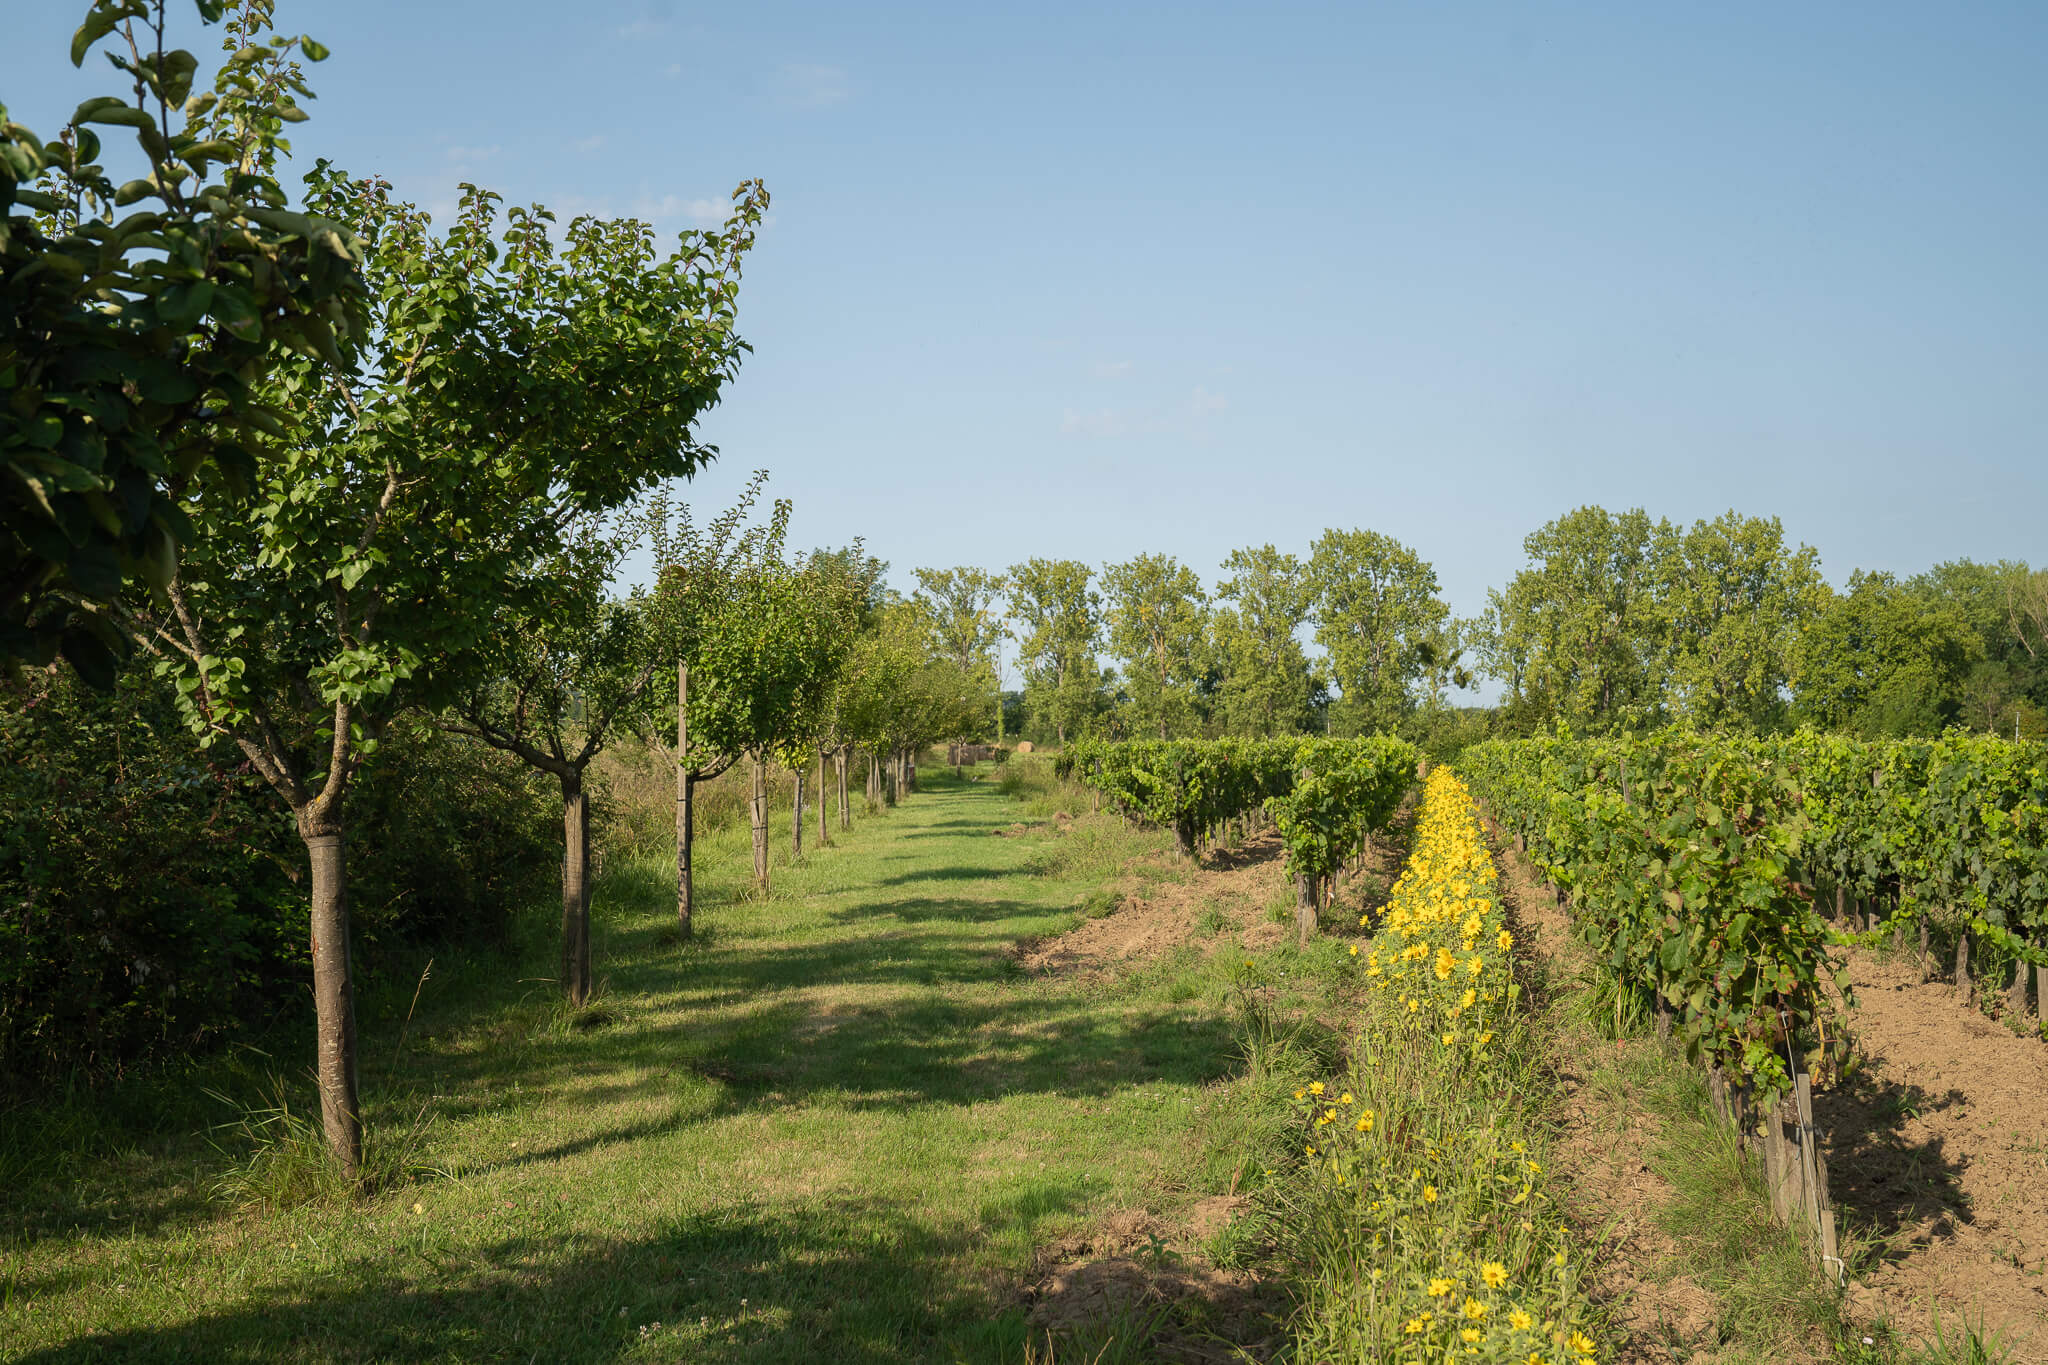 Agroforestry and the vineyards of Bordeaux – 6 things to know